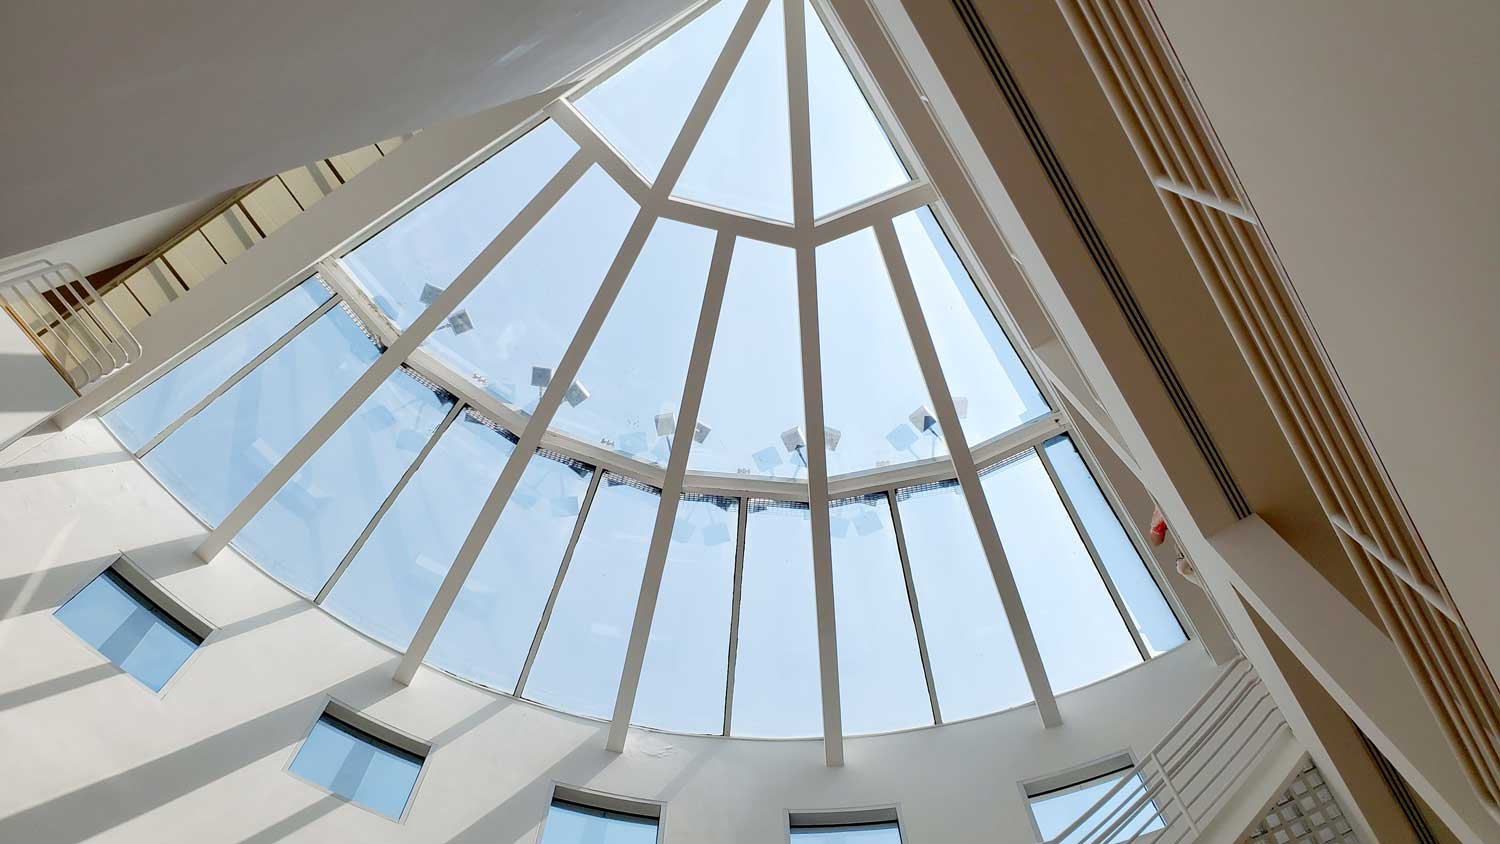 Skylight within the Richard Meier Building addition of the Des Moines Art Center.